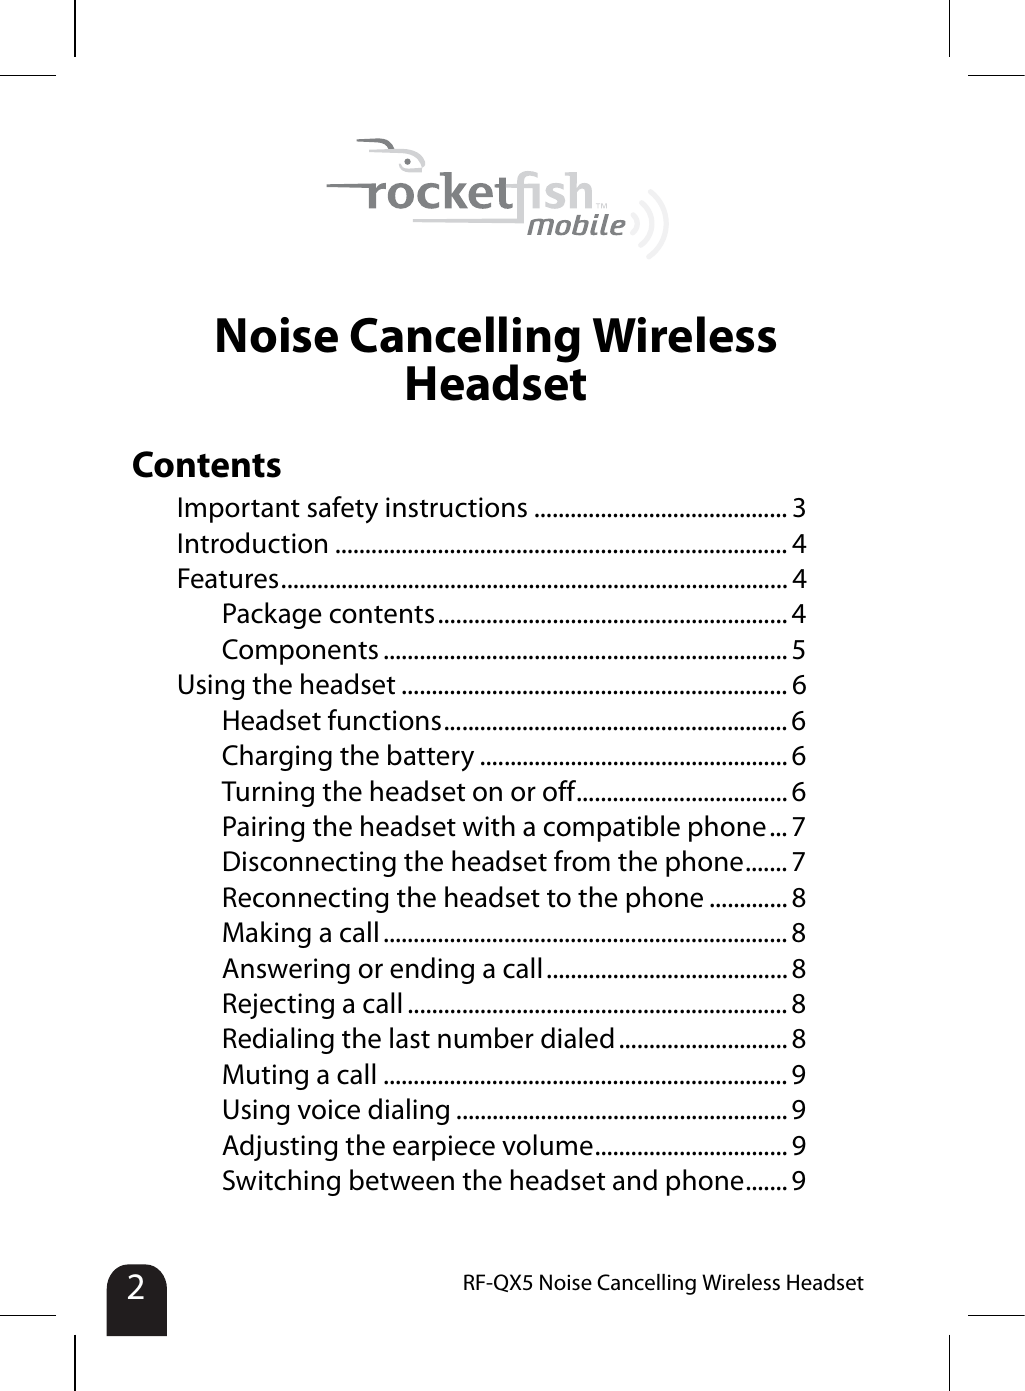 2RF-QX5 Noise Cancelling Wireless HeadsetNoise Cancelling Wireless HeadsetContentsImportant safety instructions .......................................... 3Introduction ........................................................................... 4Features.................................................................................... 4Package contents.......................................................... 4Components ................................................................... 5Using the headset ................................................................ 6Headset functions......................................................... 6Charging the battery ................................................... 6Turning the headset on or off................................... 6Pairing the headset with a compatible phone... 7Disconnecting the headset from the phone....... 7Reconnecting the headset to the phone ............. 8Making a call ................................................................... 8Answering or ending a call........................................ 8Rejecting a call ............................................................... 8Redialing the last number dialed ............................ 8Muting a call ................................................................... 9Using voice dialing ....................................................... 9Adjusting the earpiece volume................................ 9Switching between the headset and phone....... 9